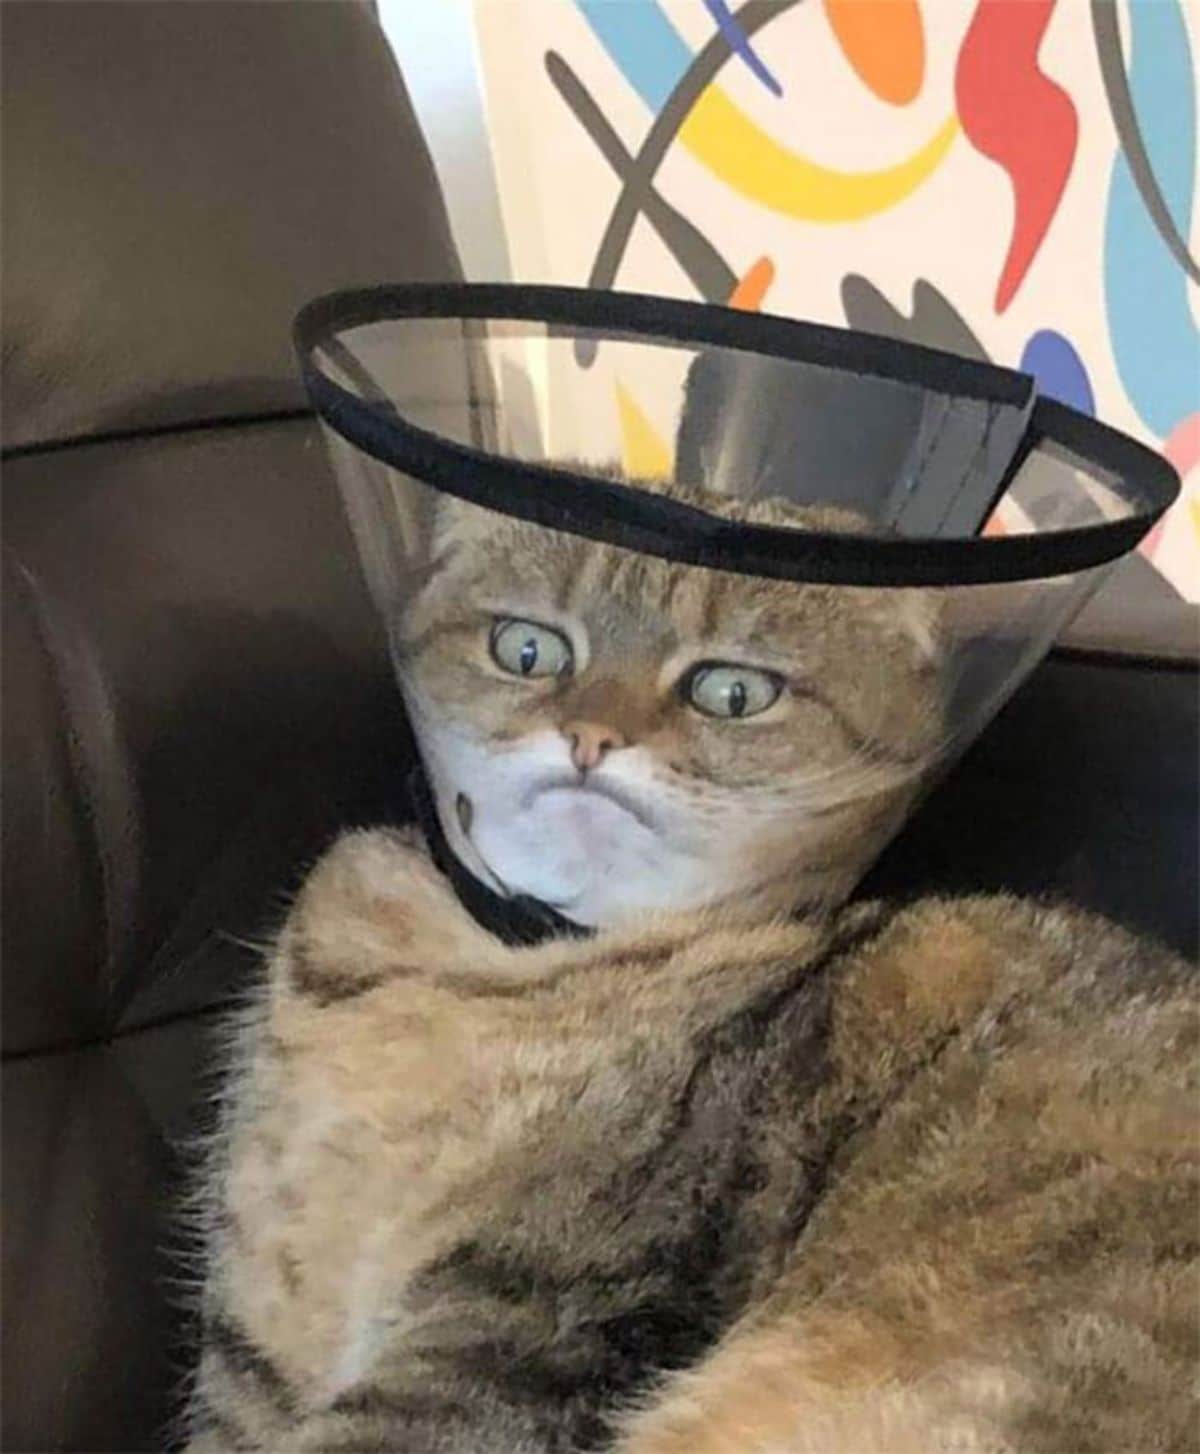 black orange and white cat sitting with a cone of shame on and the face smushed against the cone